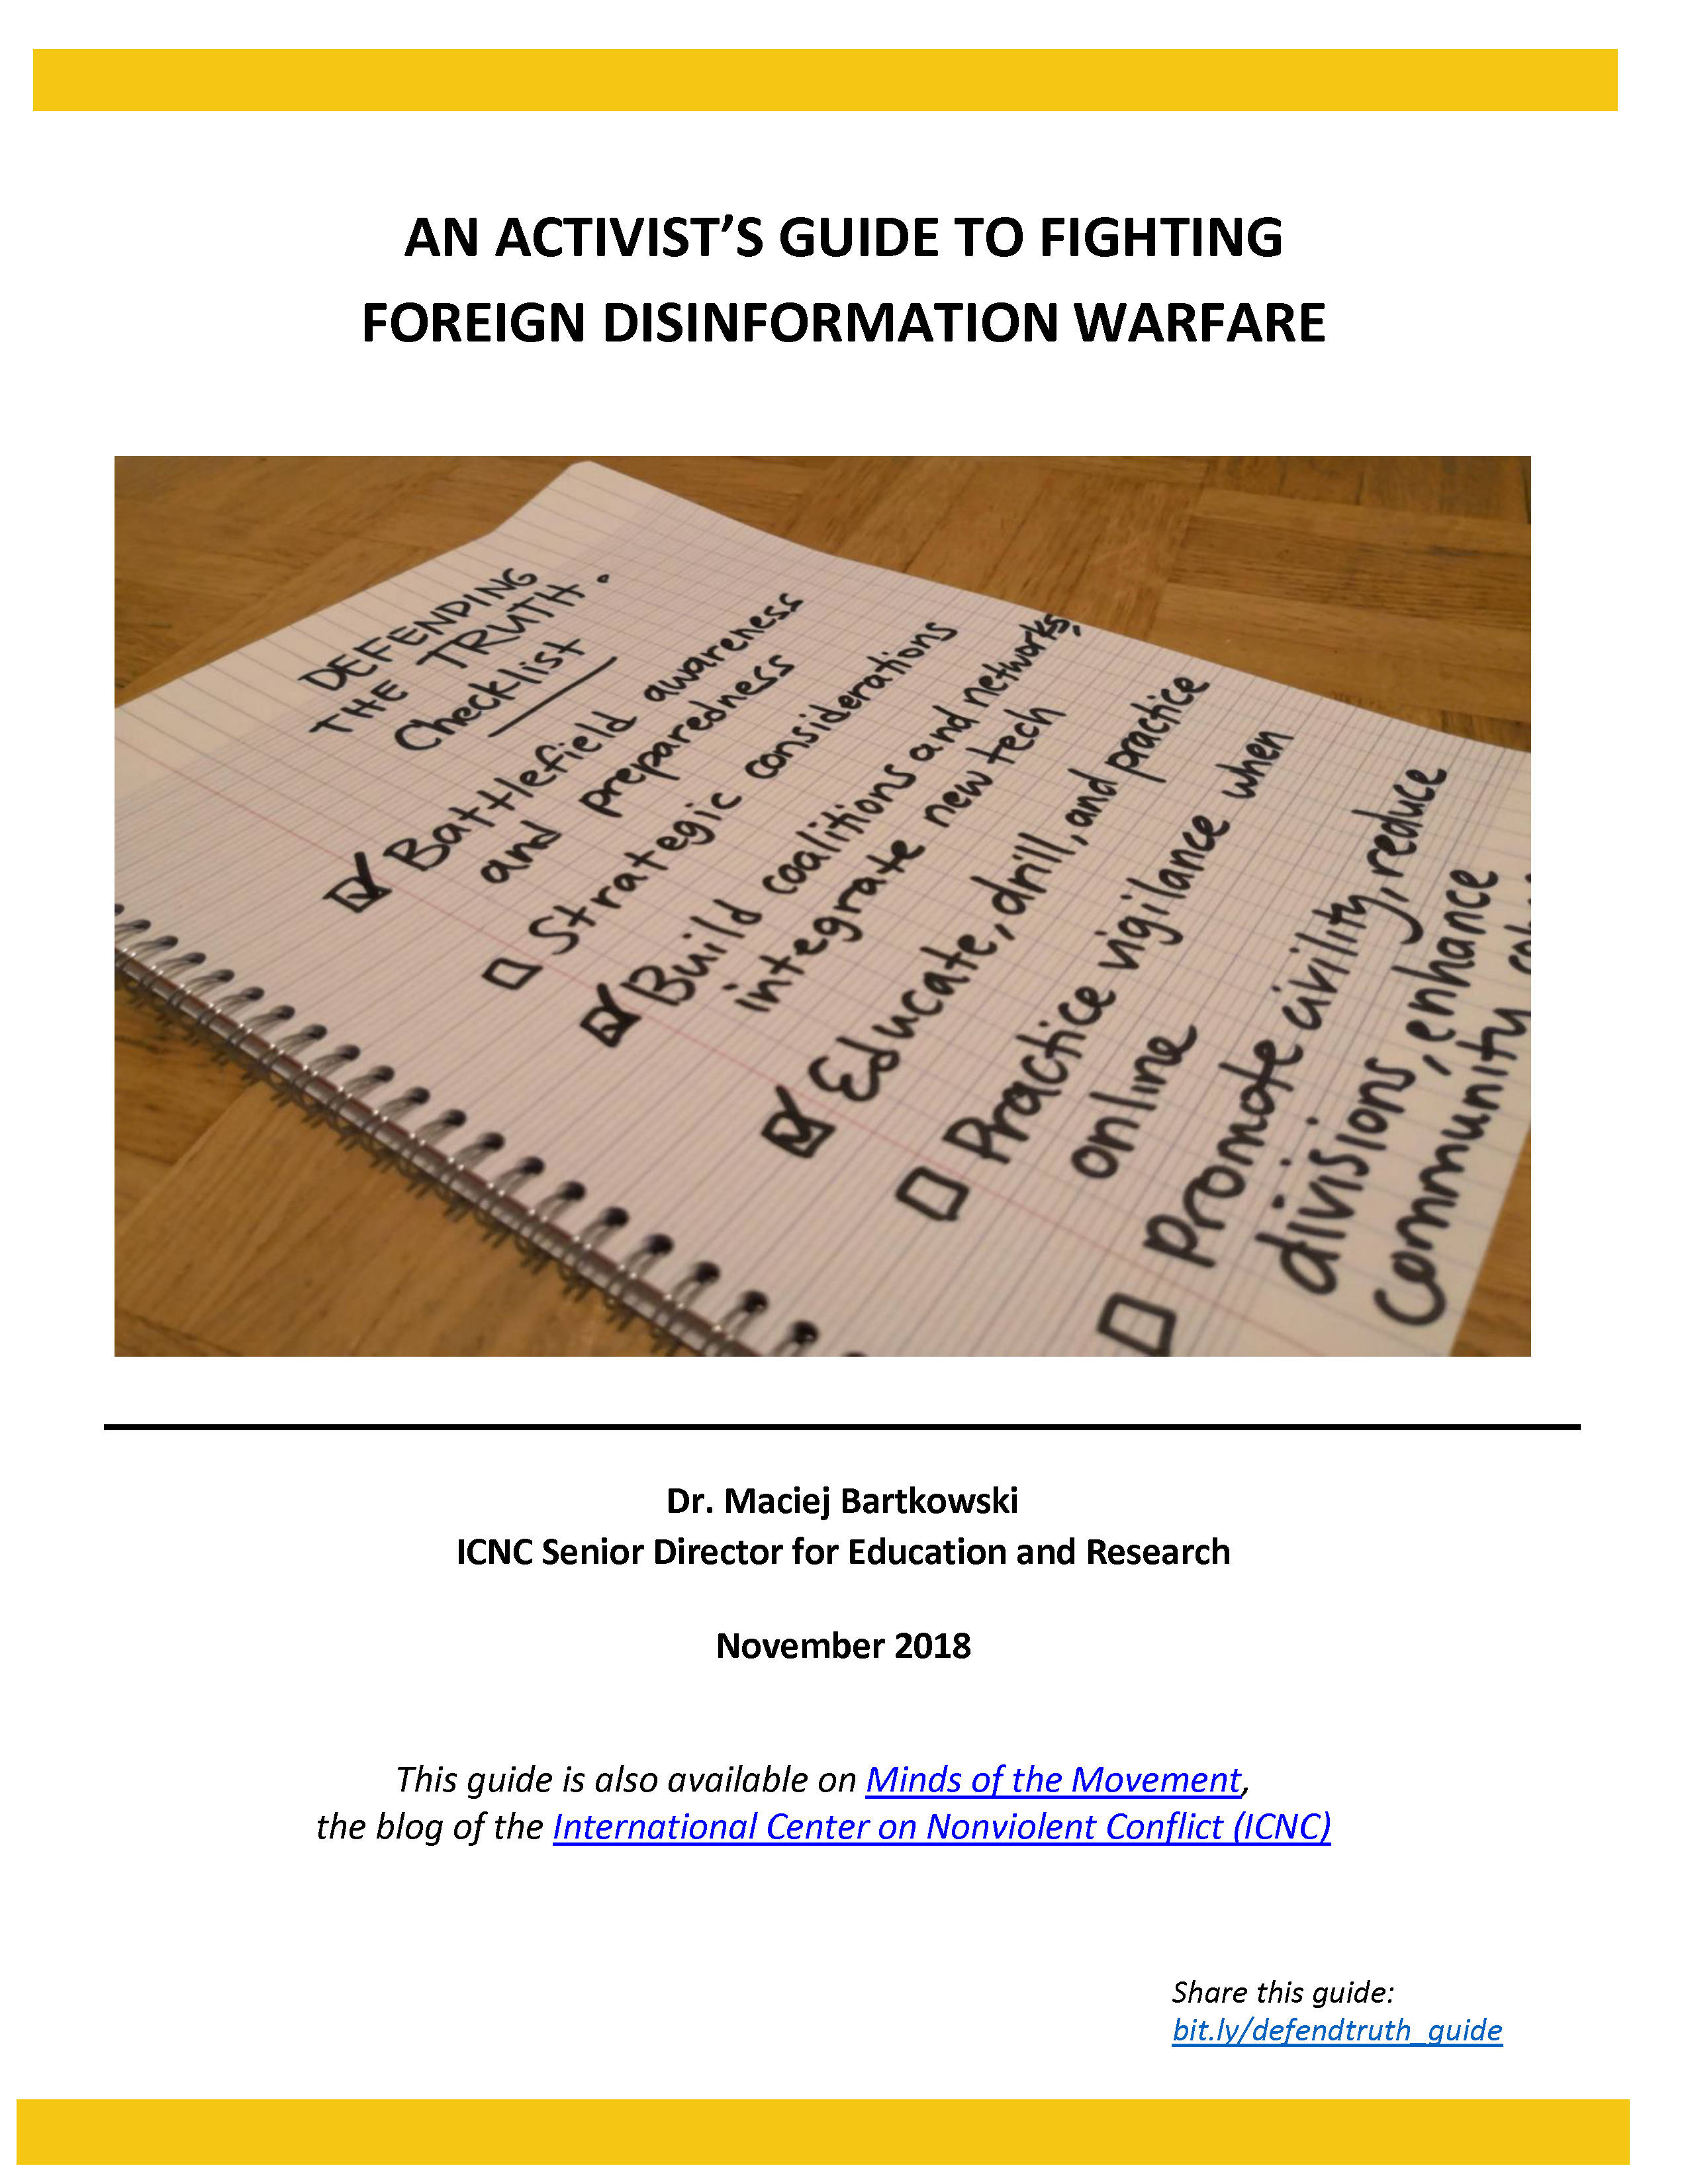 An Activist’s Guide to Fighting Foreign Disinformation Warfare